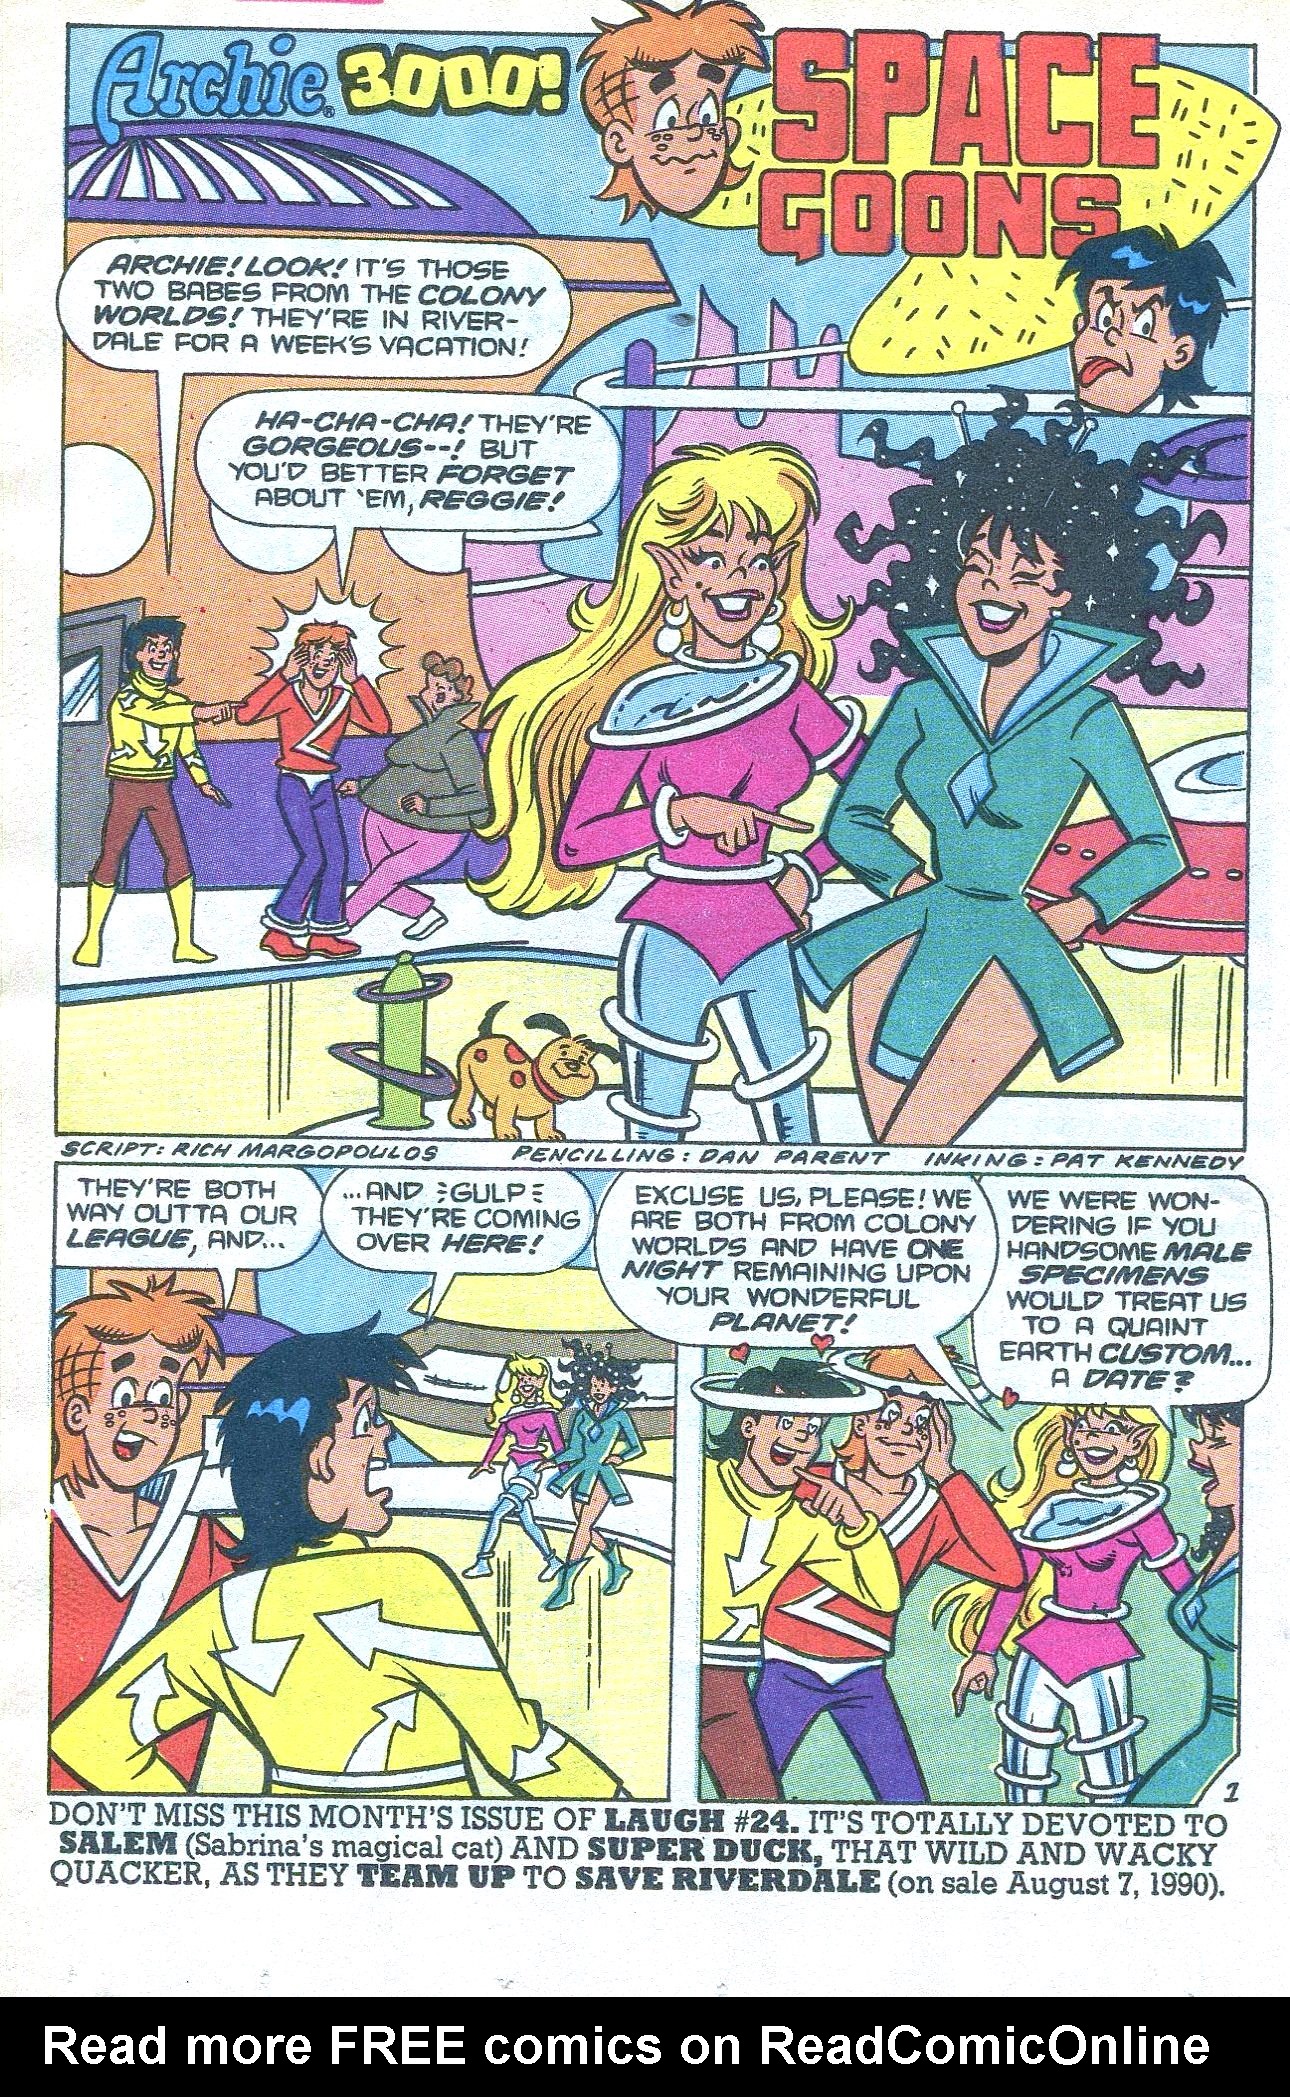 Read online Archie 3000! (1989) comic -  Issue #12 - 20